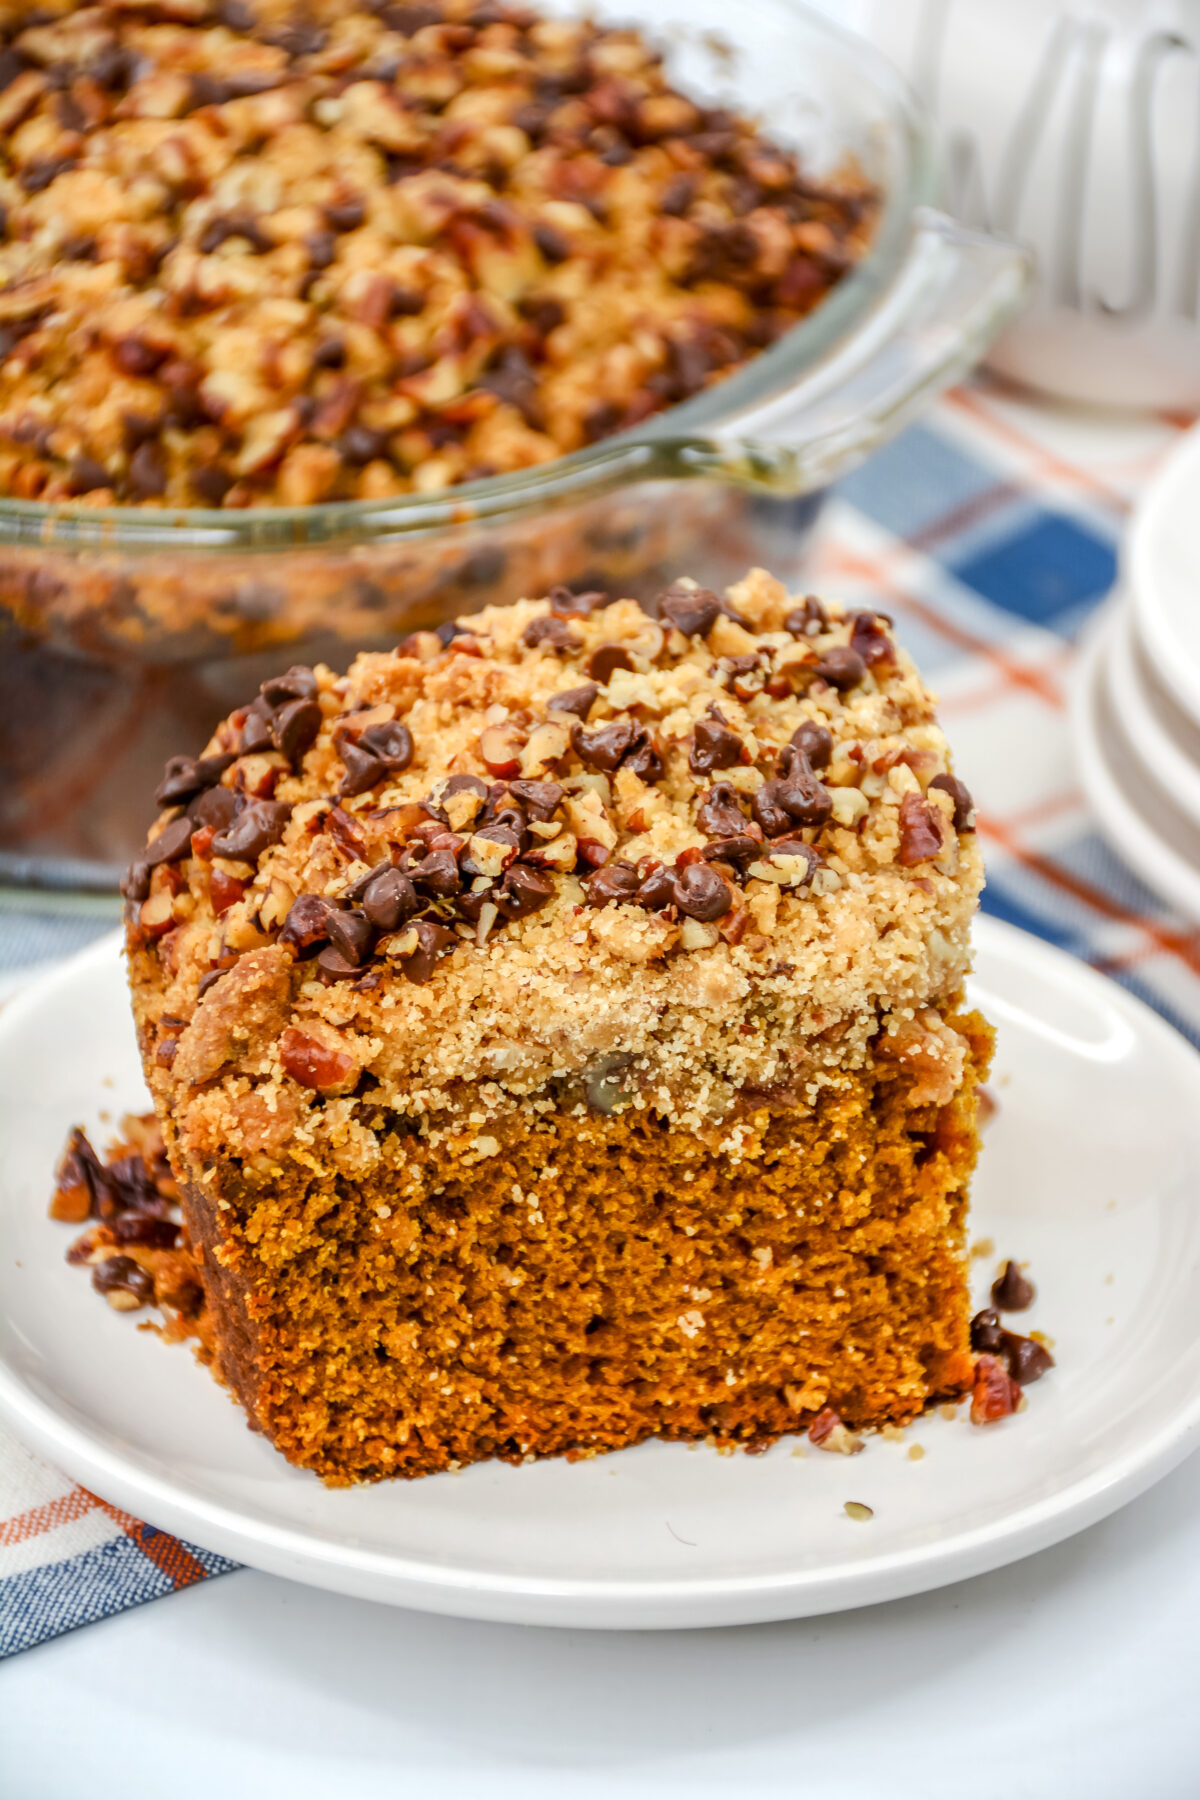 Looking for a delicious Fall dessert? This easy pecan pumpkin coffee cake will fit the bill with its moist, tender texture and hint of spice.